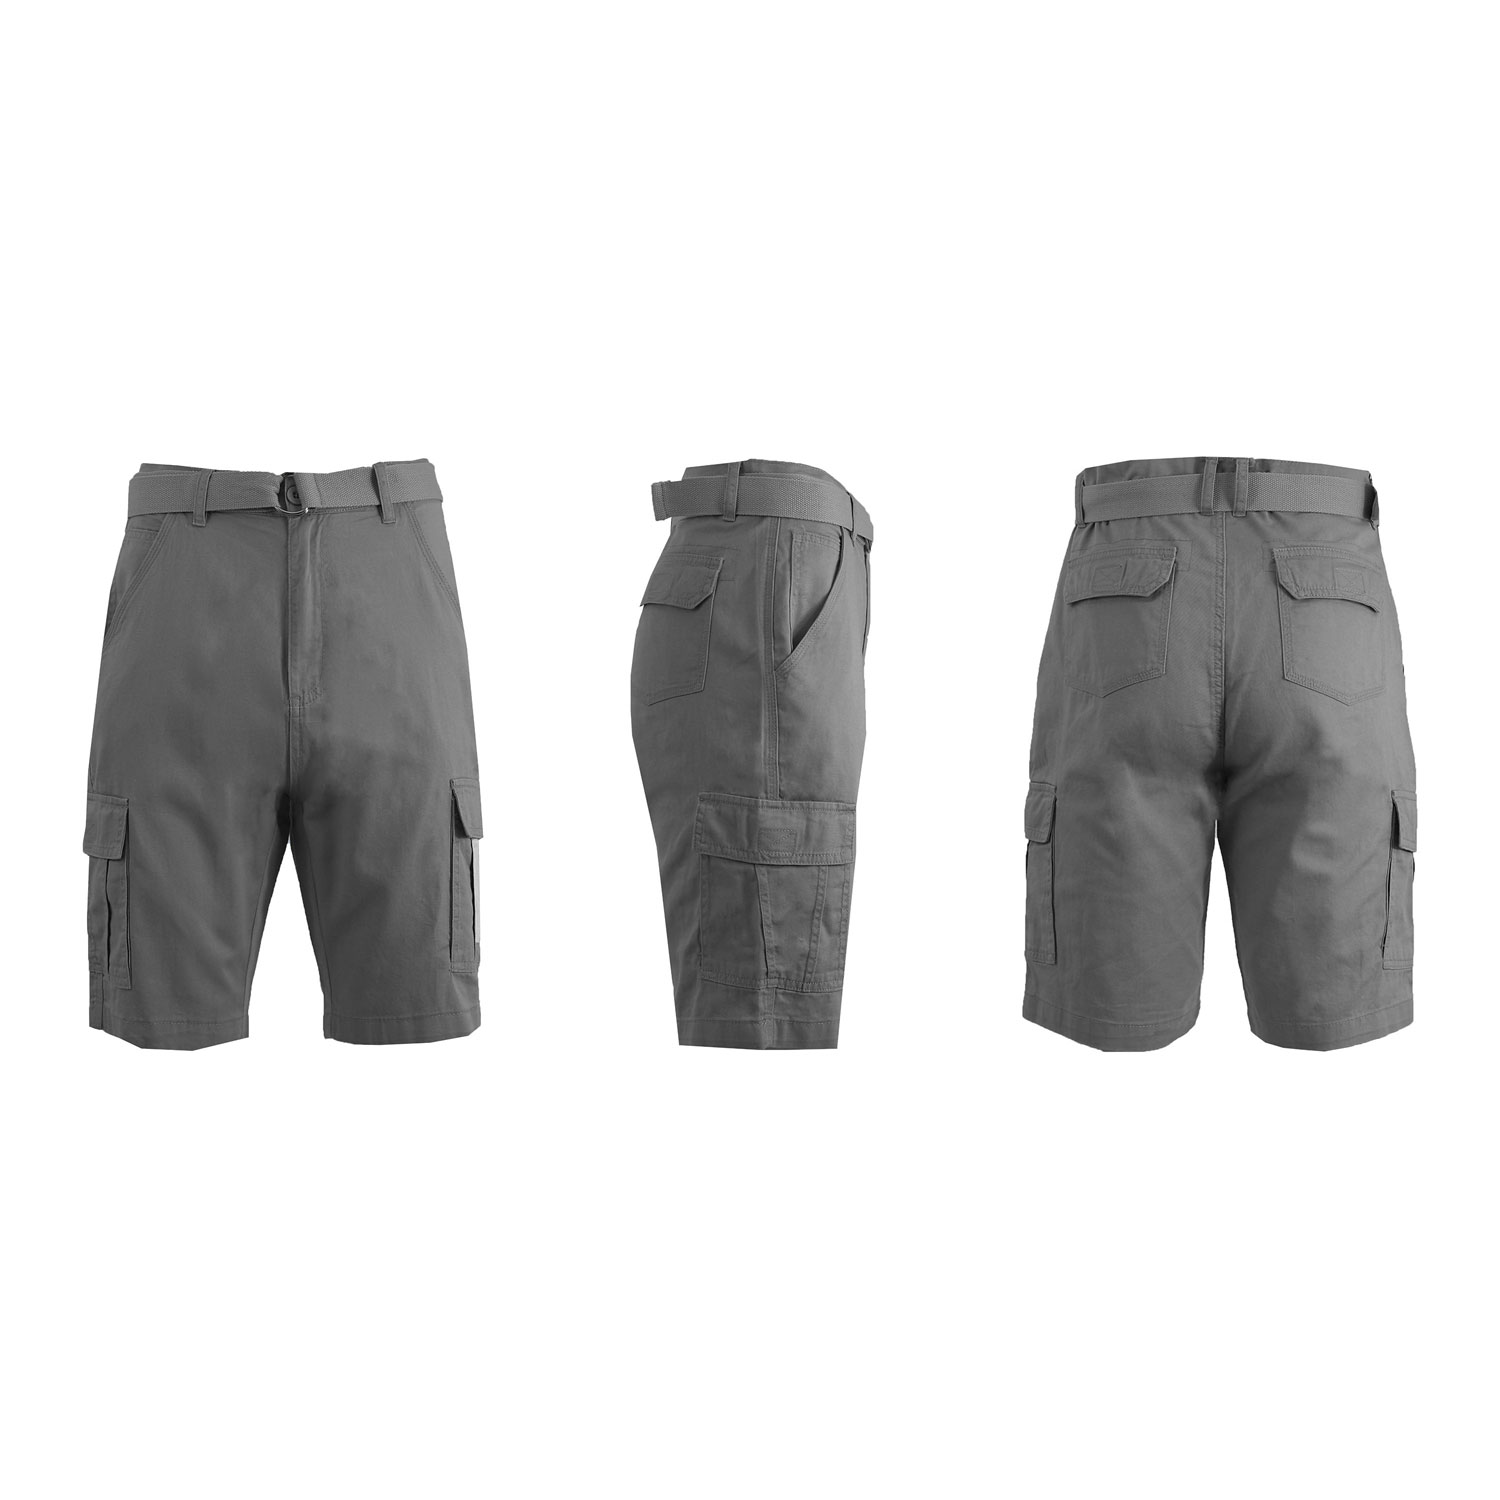 Men's Cotton Chino Shorts with Belt Sizes 30-42